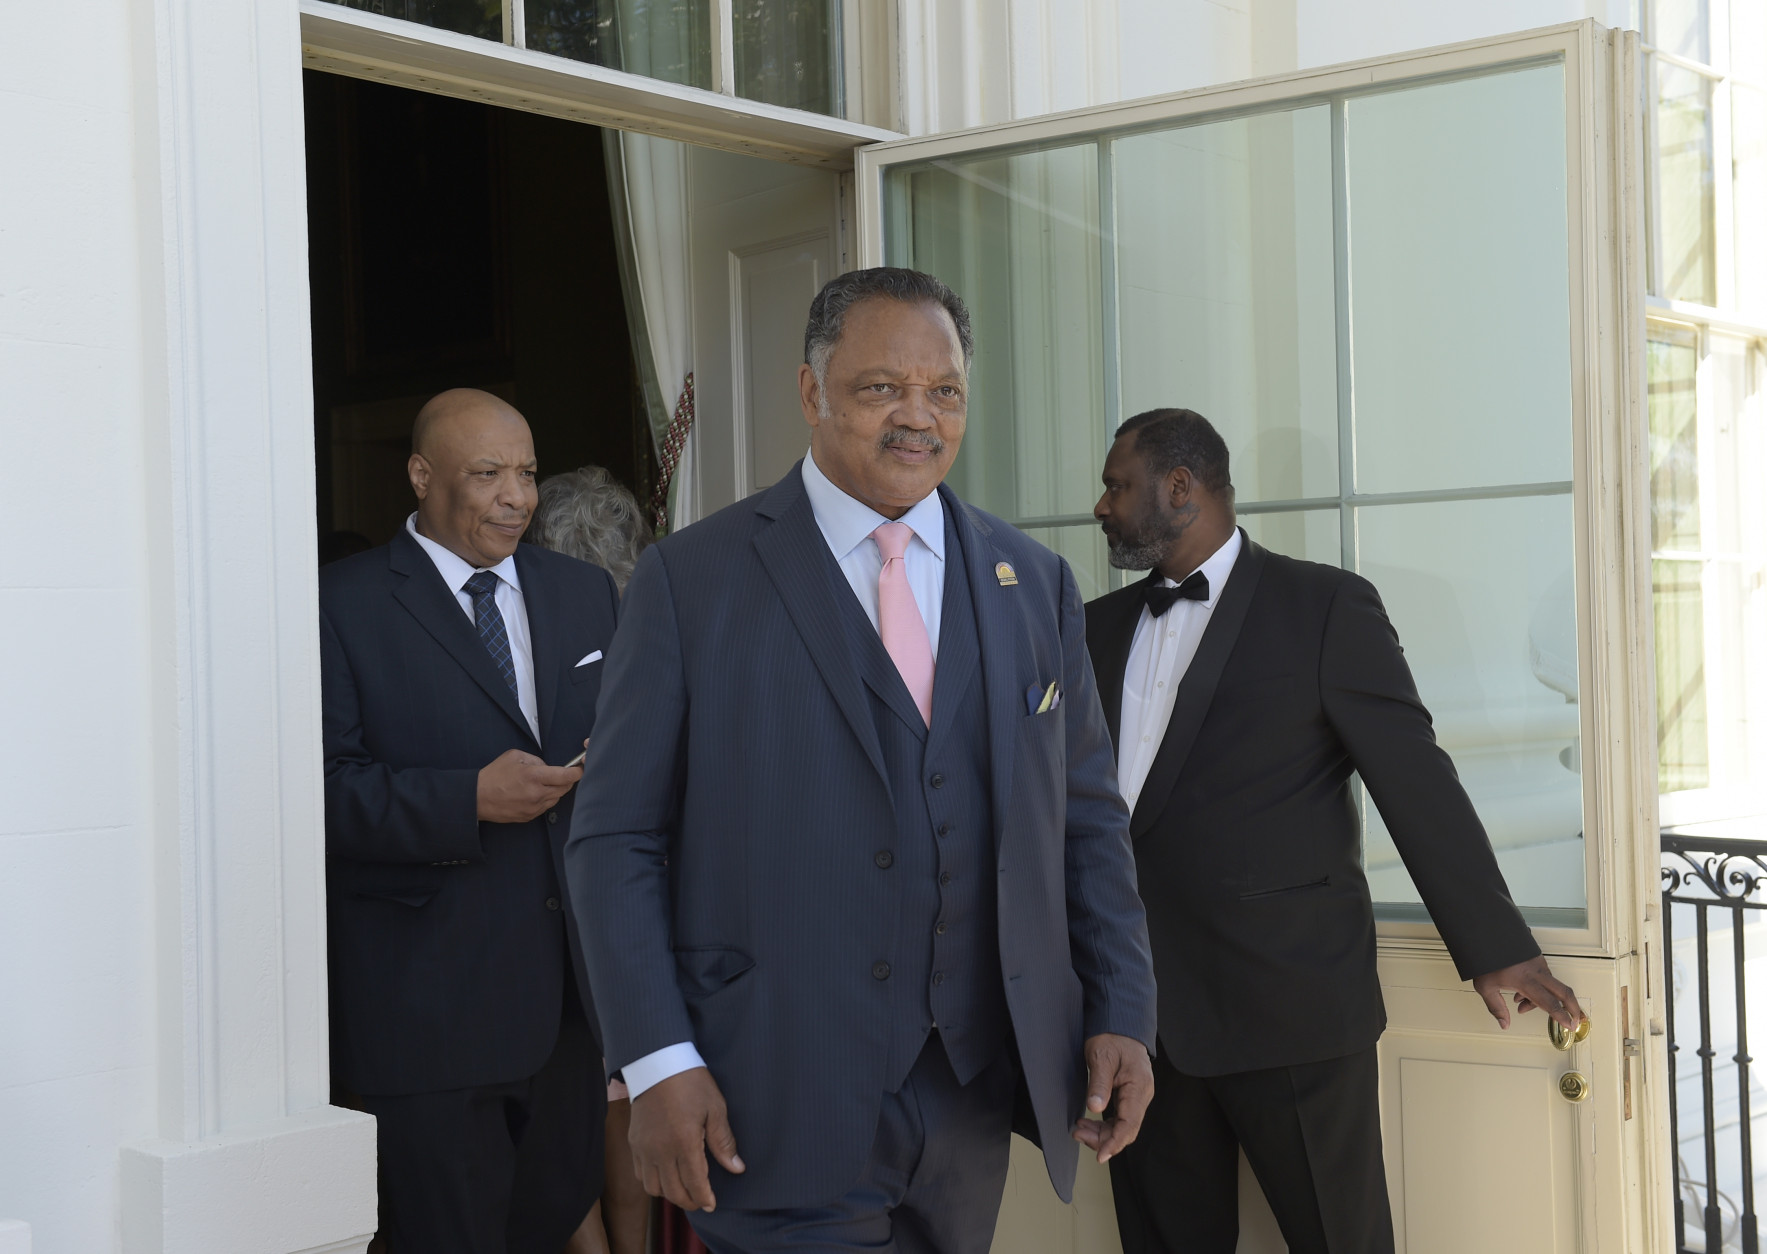 Rev. Jesse Jackson walks onto the Truman Balcony of the White House in Washington, Friday, Sept. 23, 2016, as he attends a reception for the opening of the Smithsonian's National Museum of African American History and Culture. (AP Photo/Susan Walsh)